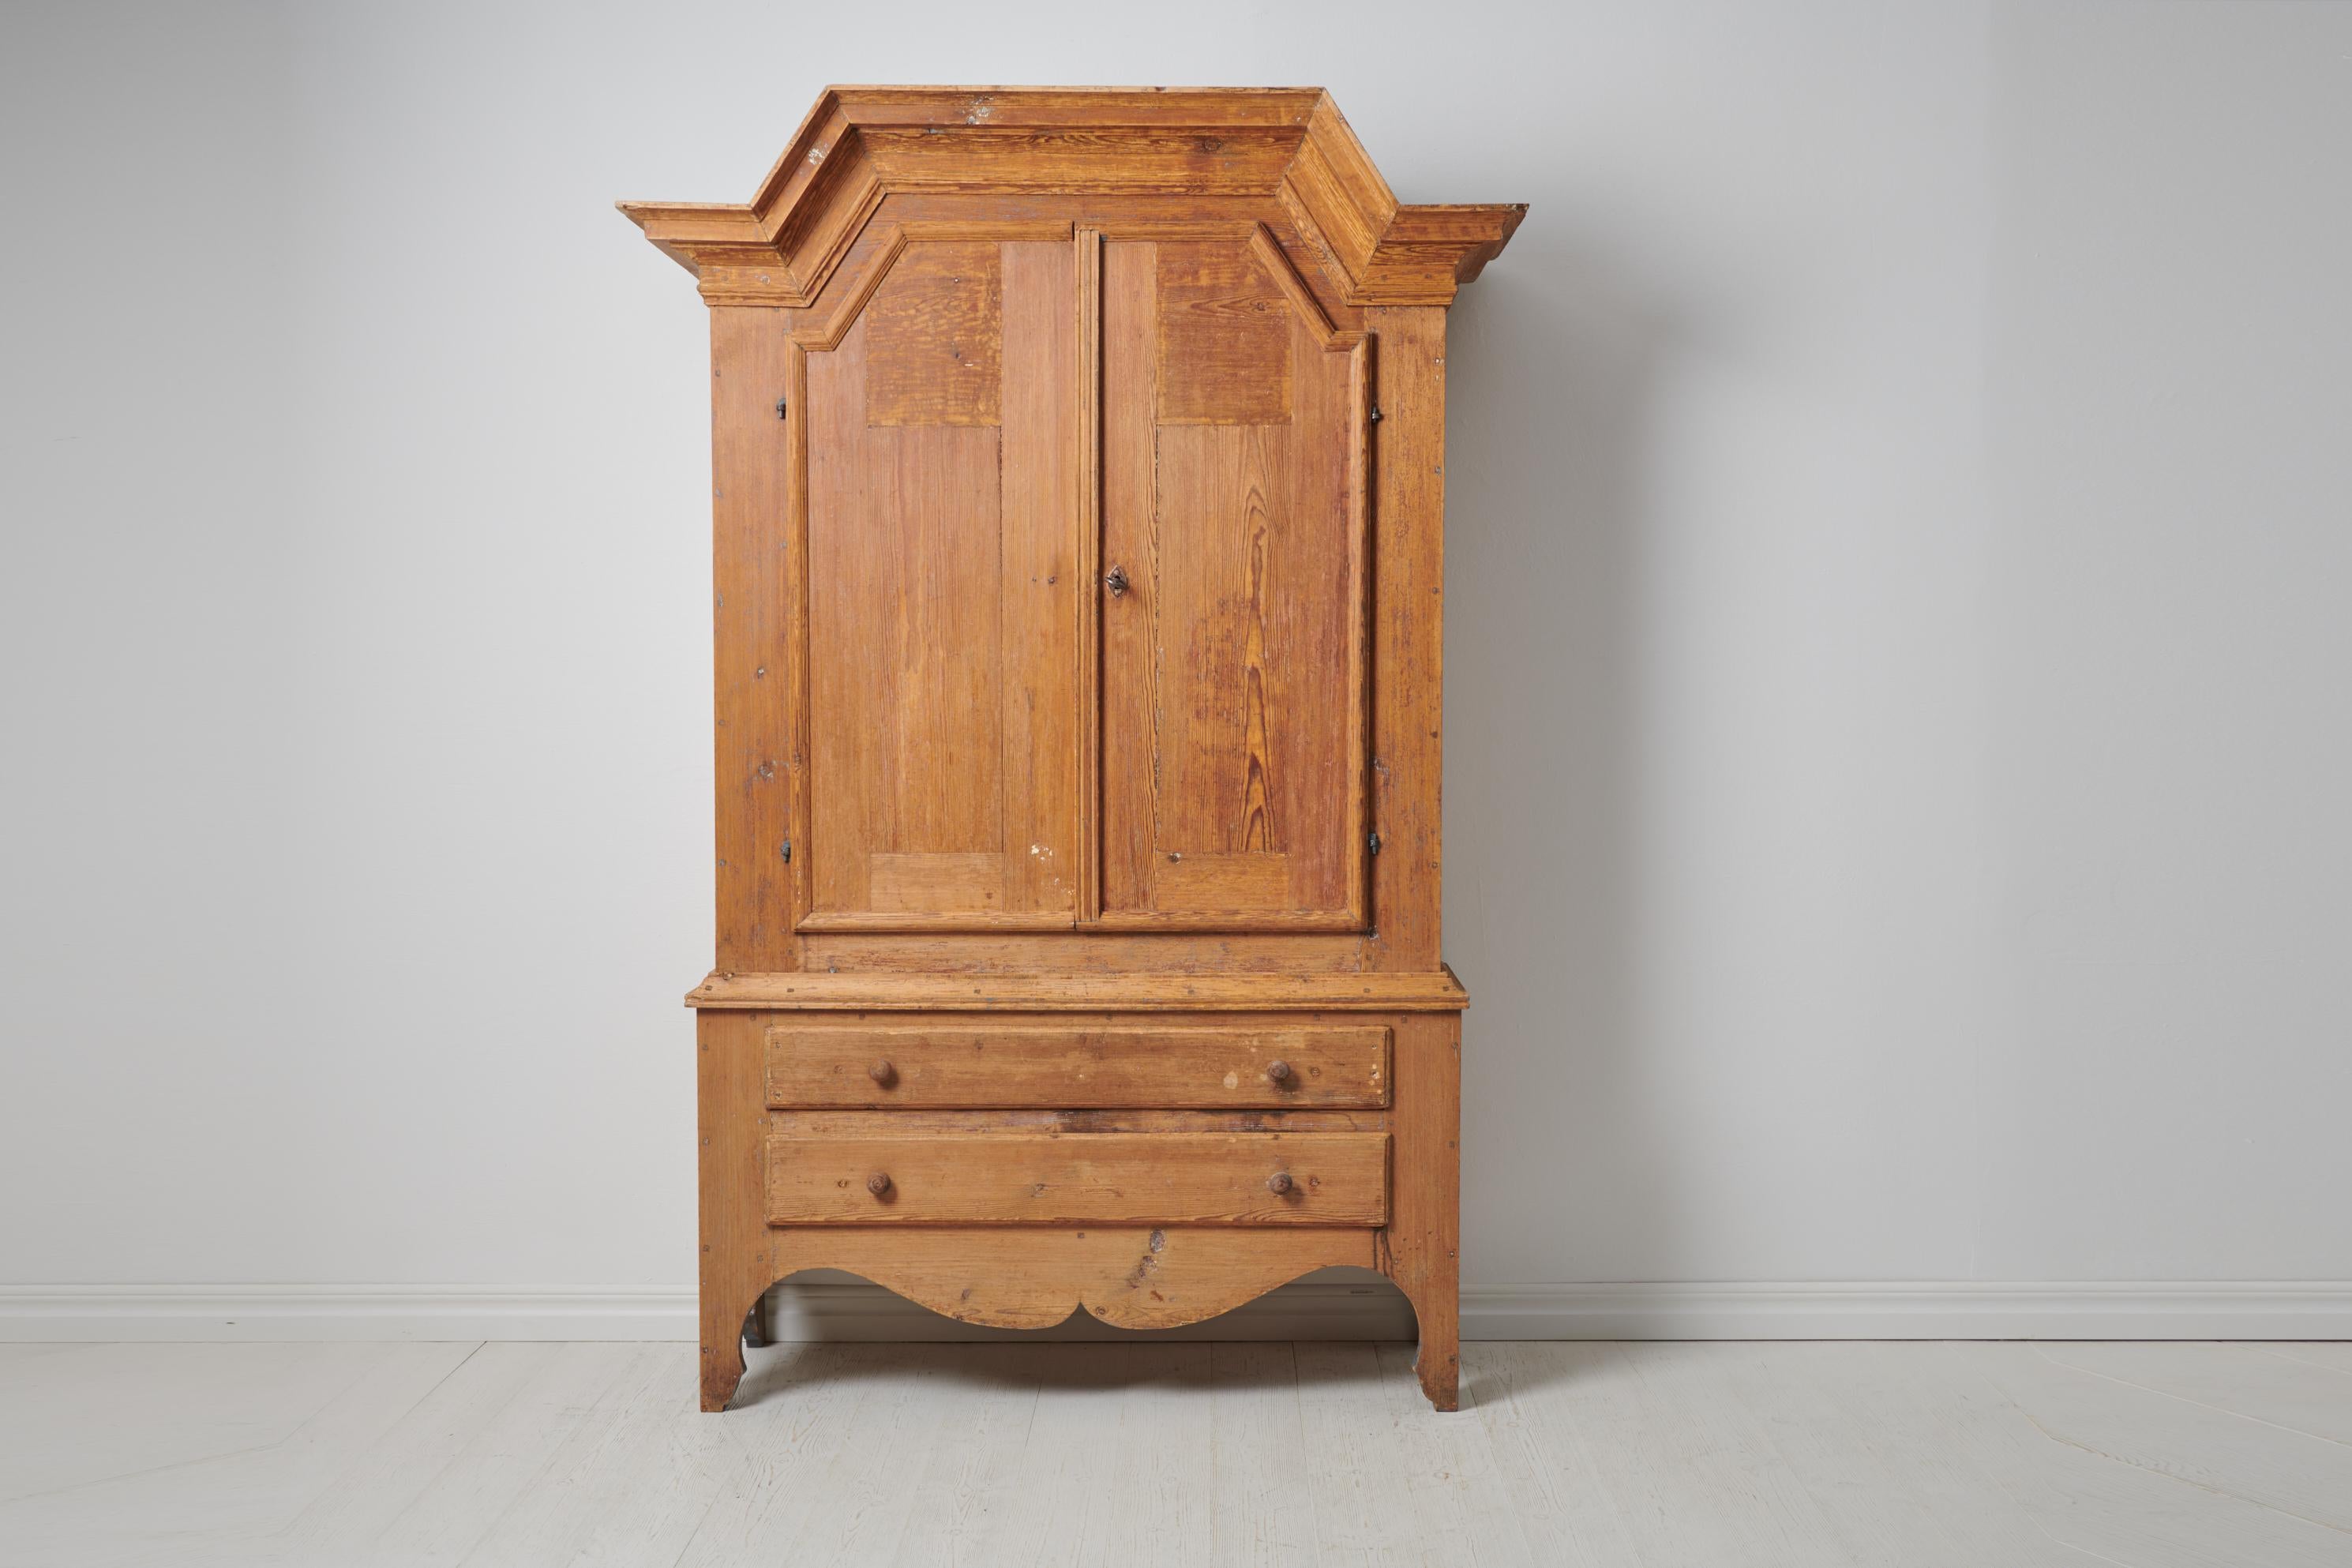 Antique folk art cabinet from Sweden made during the first years of the 19th century, around 1810. The cabinet is made by hand in solid pine. The cabinet has a rustic surface with bare pine wood where the grain of the wood is visible. The joints are